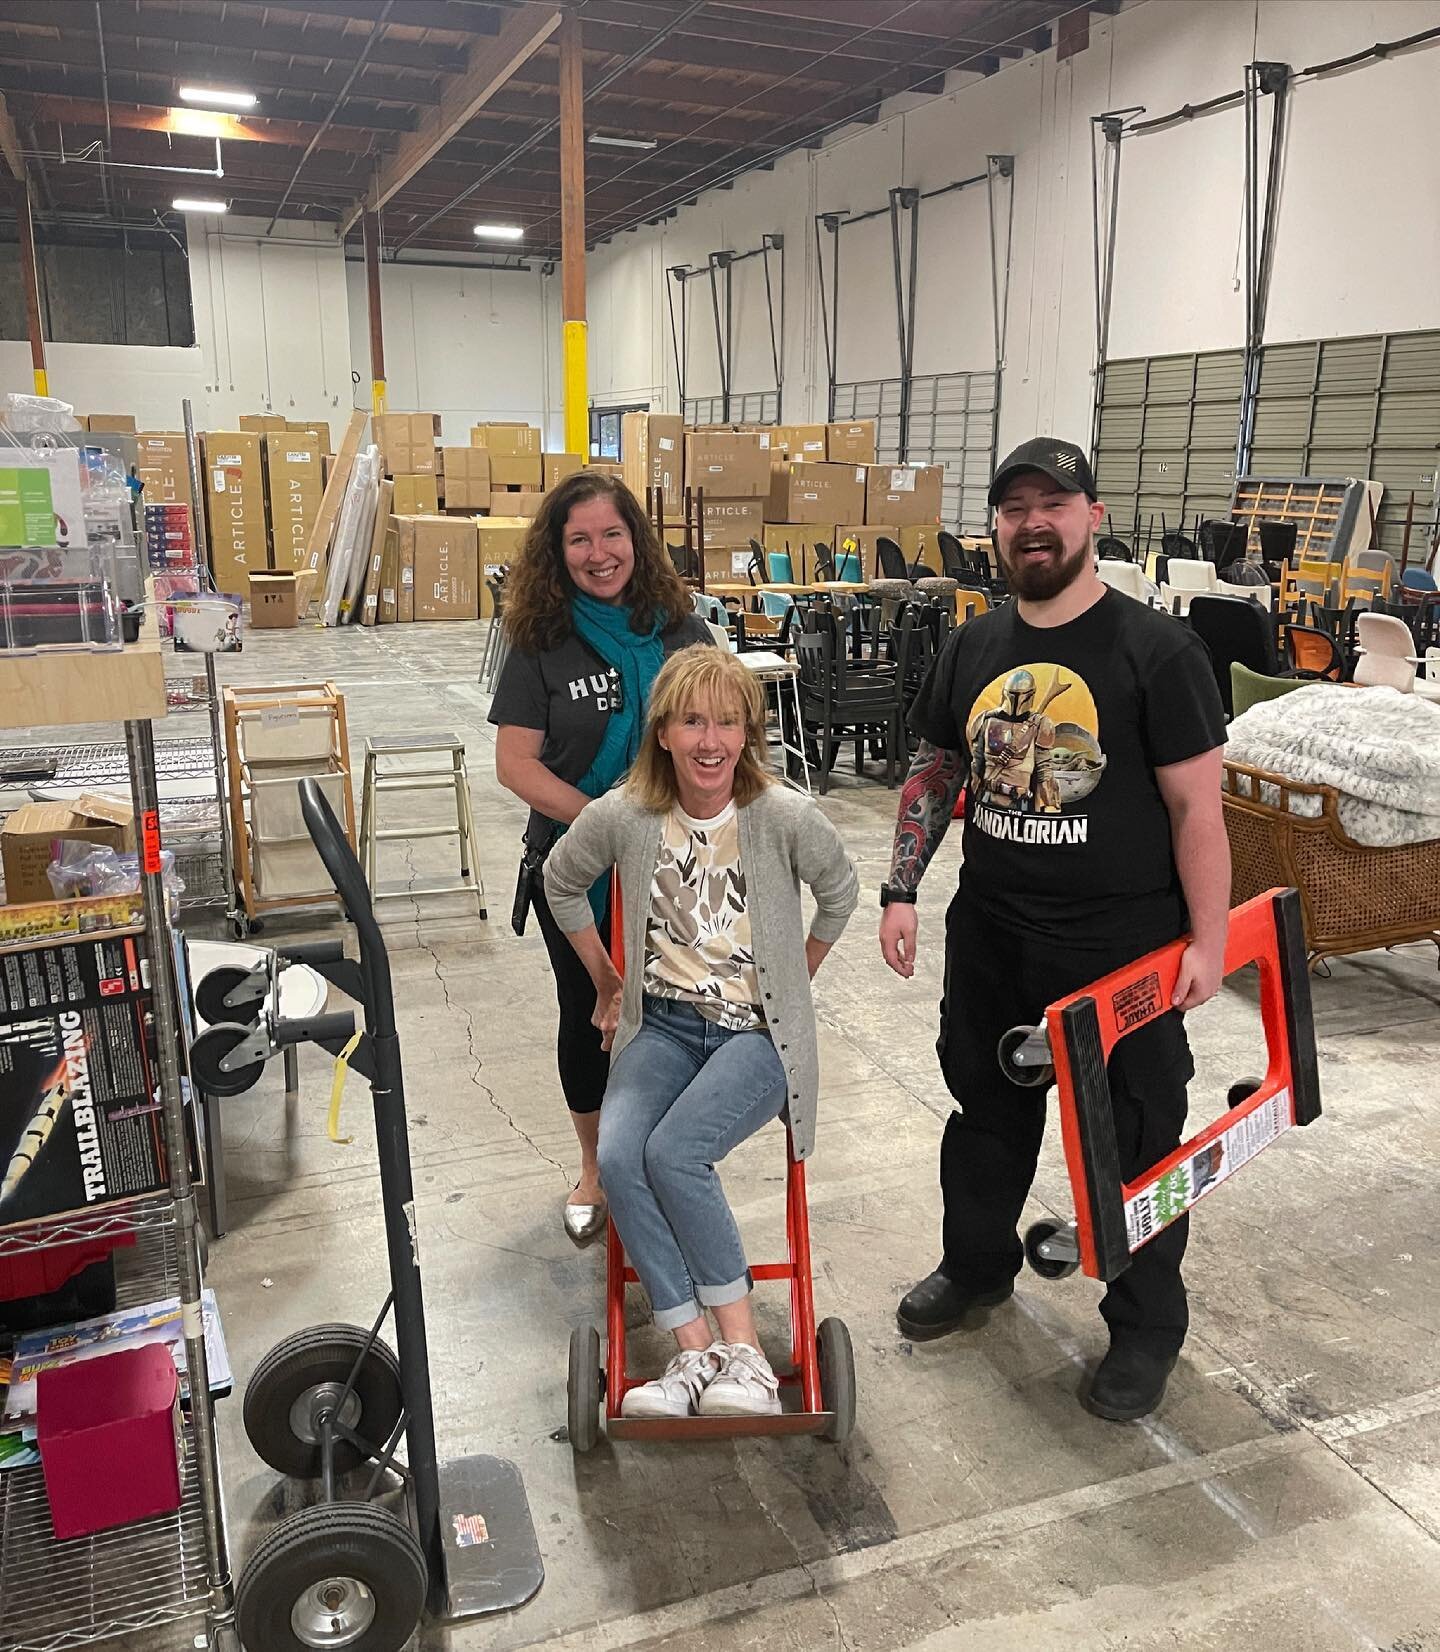 Sorry we&rsquo;ve been a bit quiet on here. We had to move&hellip; again! 📦

A huge shout out to this team and all of our amazingly hardworking volunteers. They executed our second move in three months without a single complaint, and made sure we go